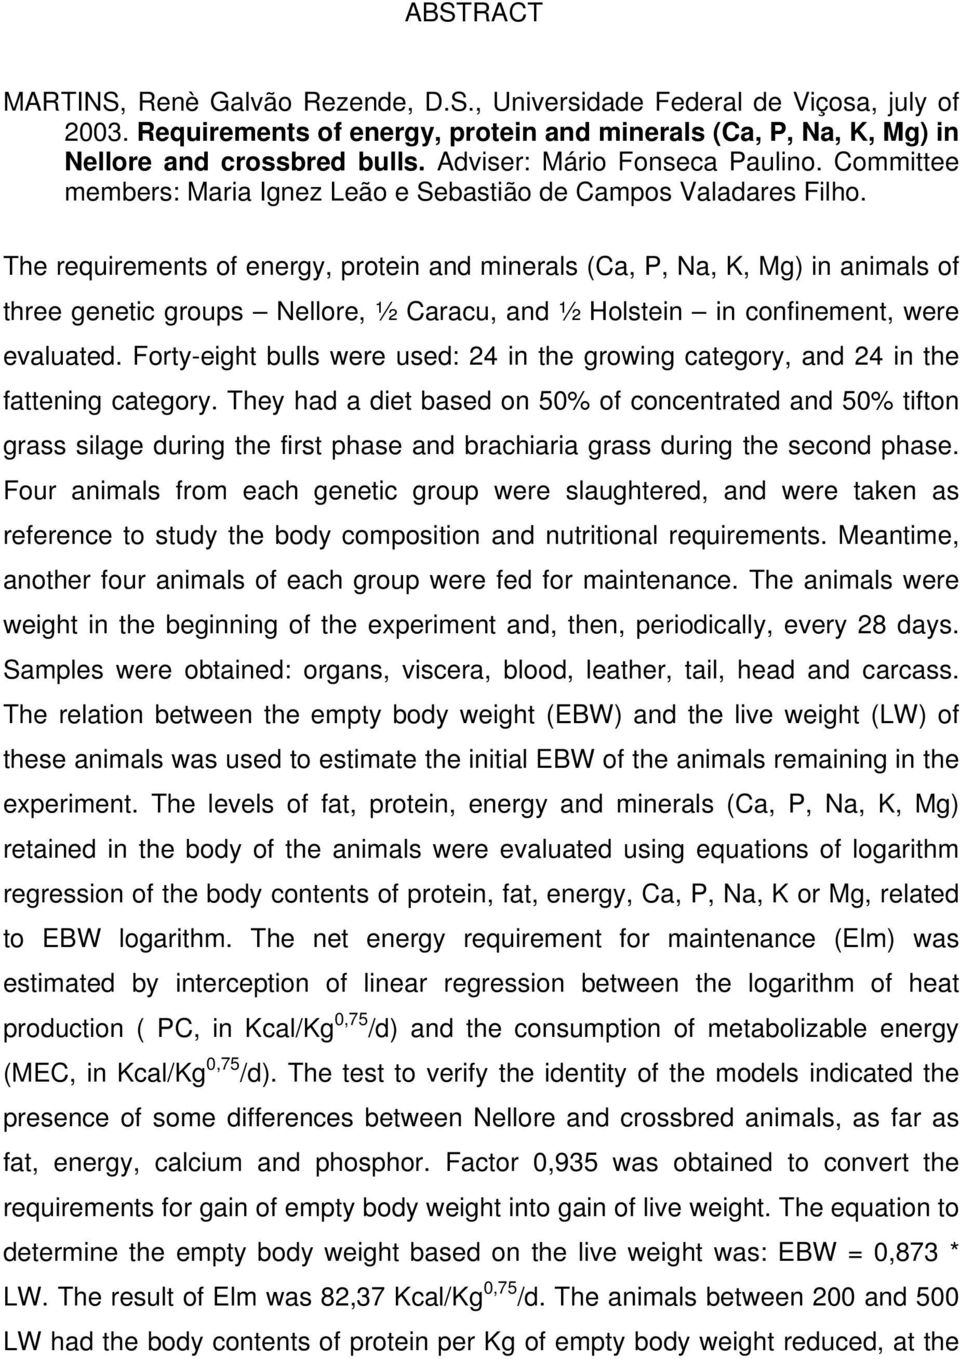 The requirements of energy, protein and minerals (Ca, P, Na, K, Mg) in animals of three genetic groups Nellore, ½ Caracu, and ½ Holstein in confinement, were evaluated.